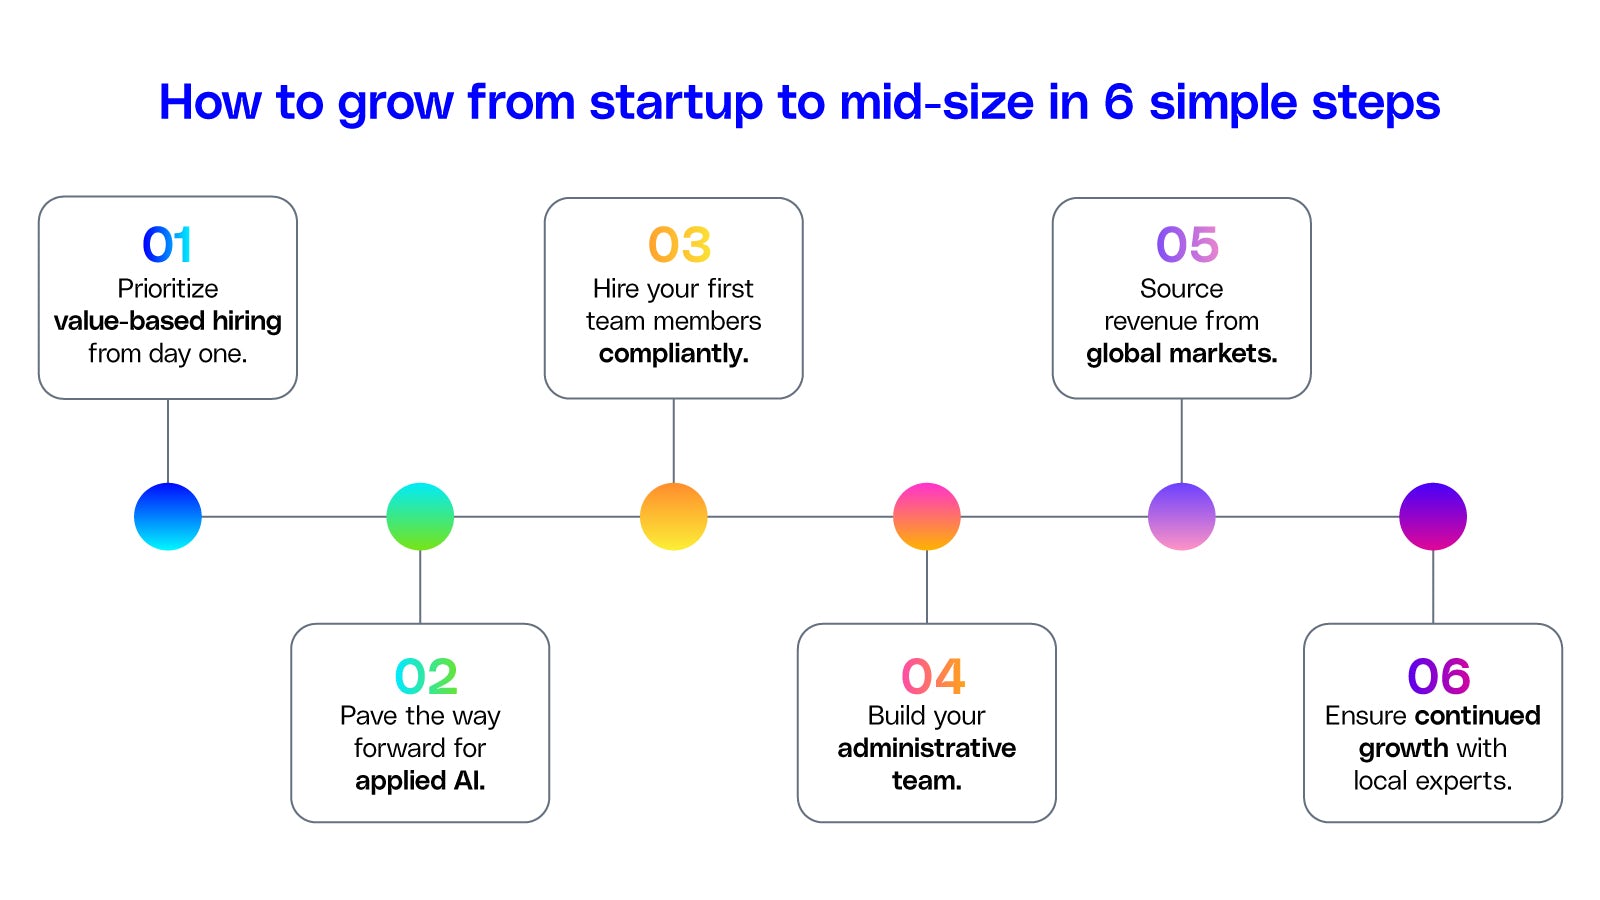 6 steps to grow from startup to mid-size